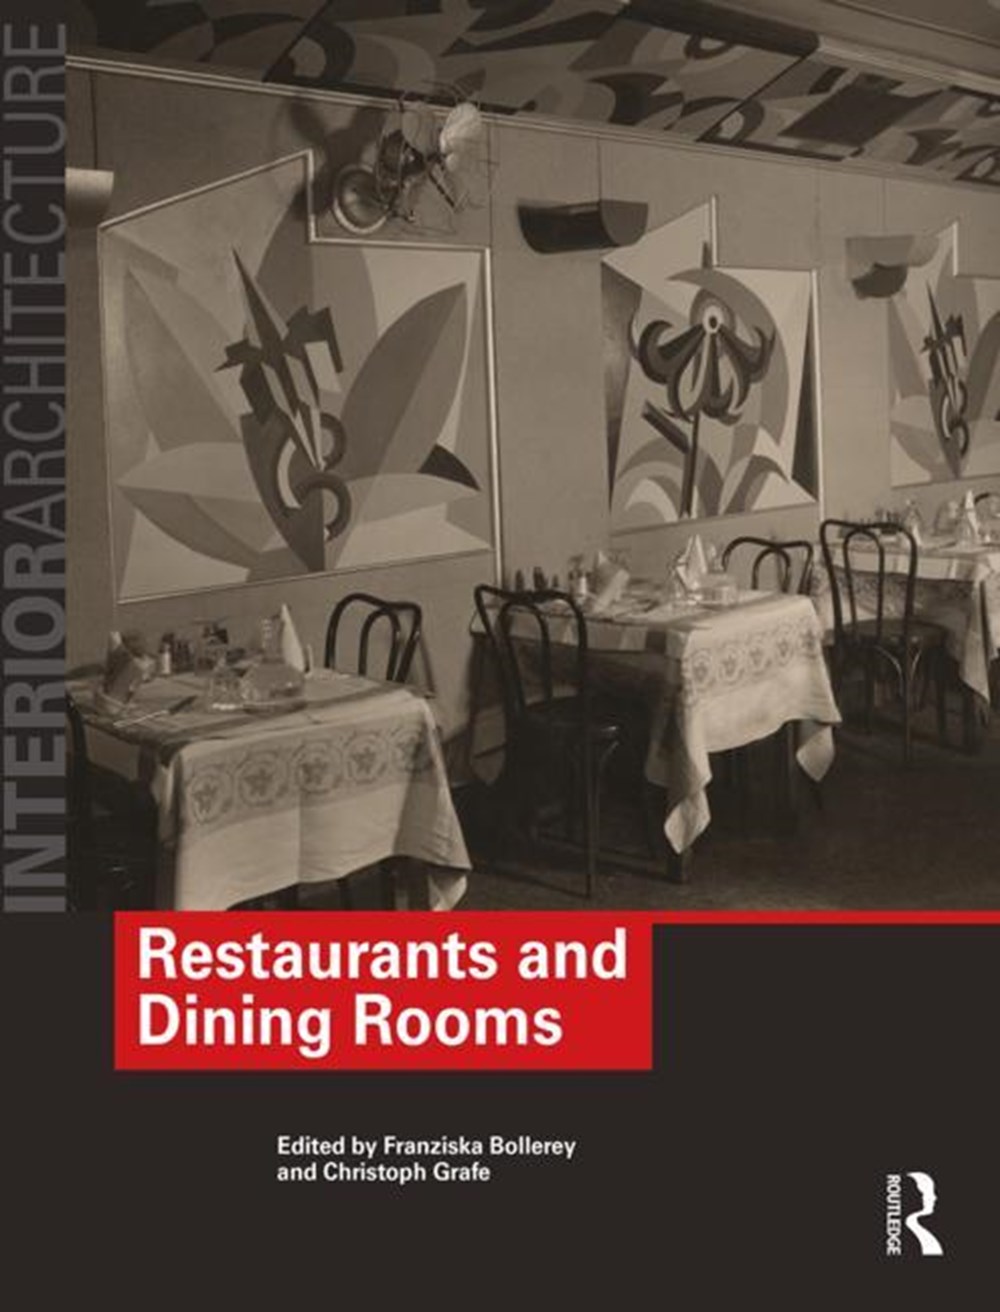 Restaurants and Dining Rooms (Revised)